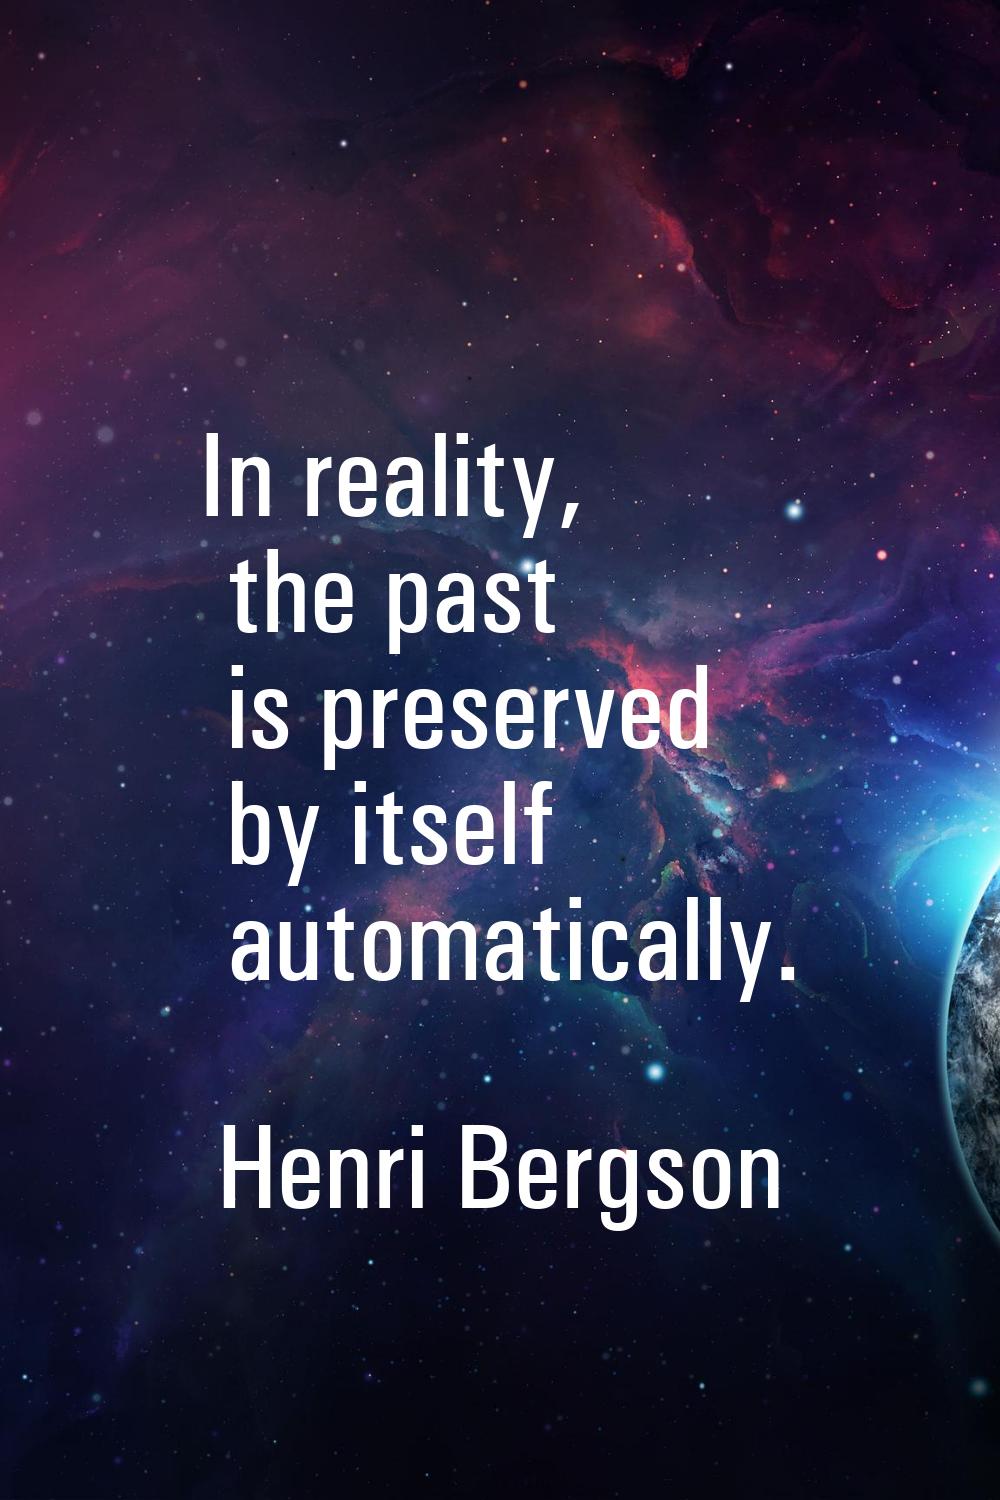 In reality, the past is preserved by itself automatically.